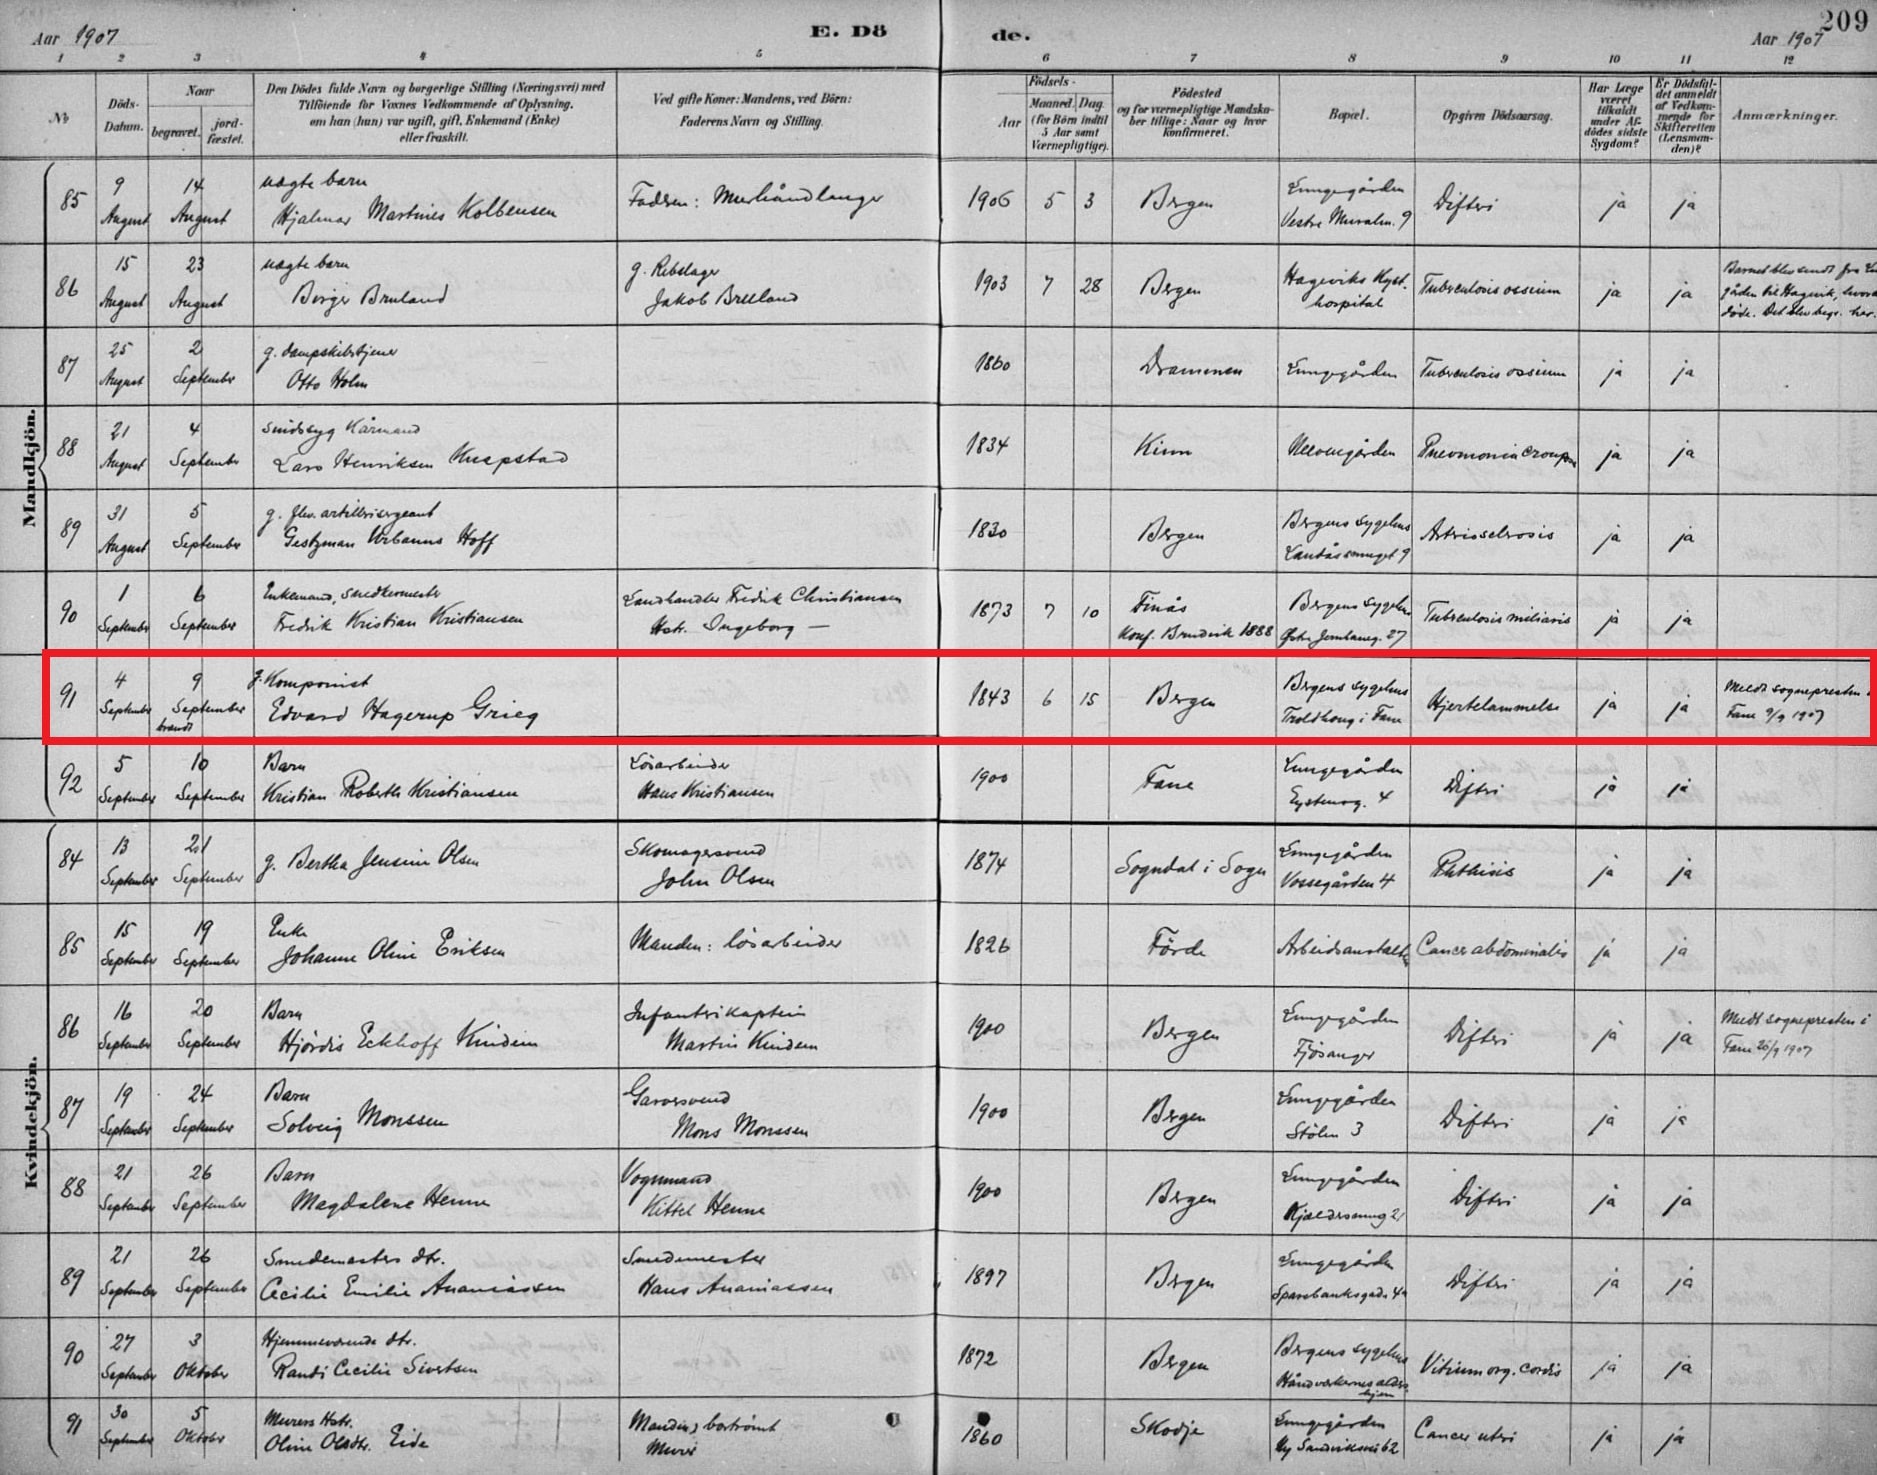 Burial record of Edvard Grieg, 1907. [Credit: MyHeritage Norway Church Records, 1815–1938]